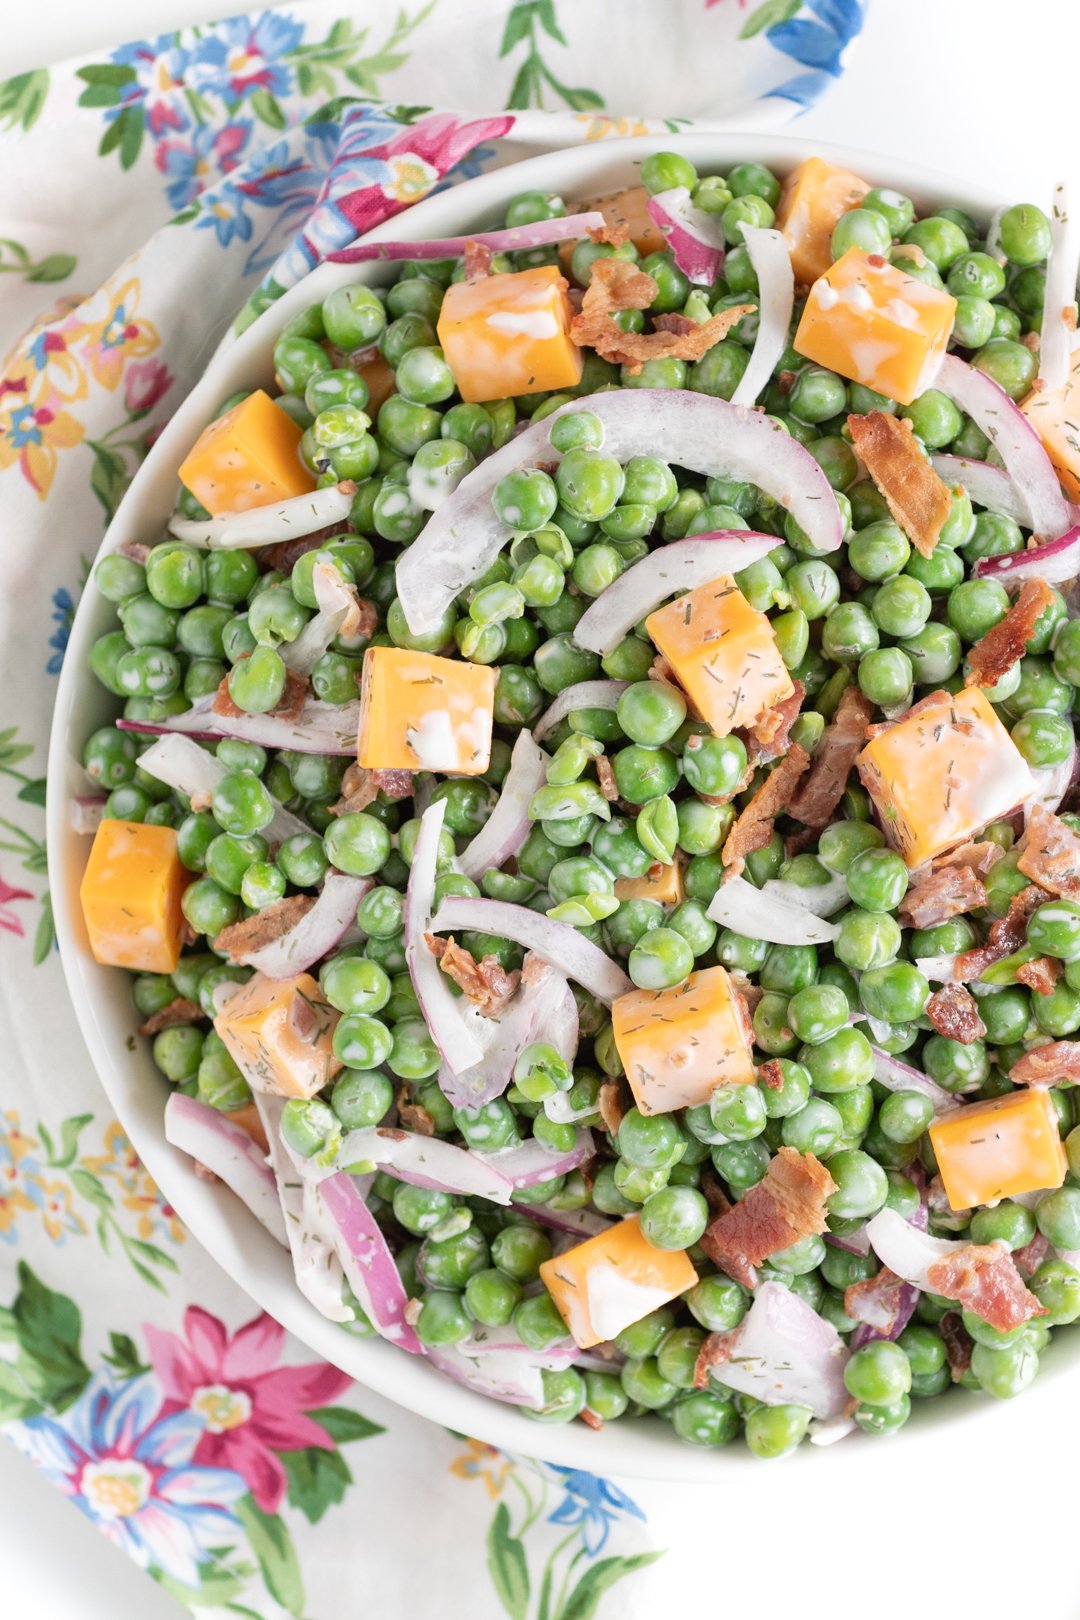 up close view of pea salad with creamy dressing, cheddar cheese chunks, onion slivers and chopped bacon